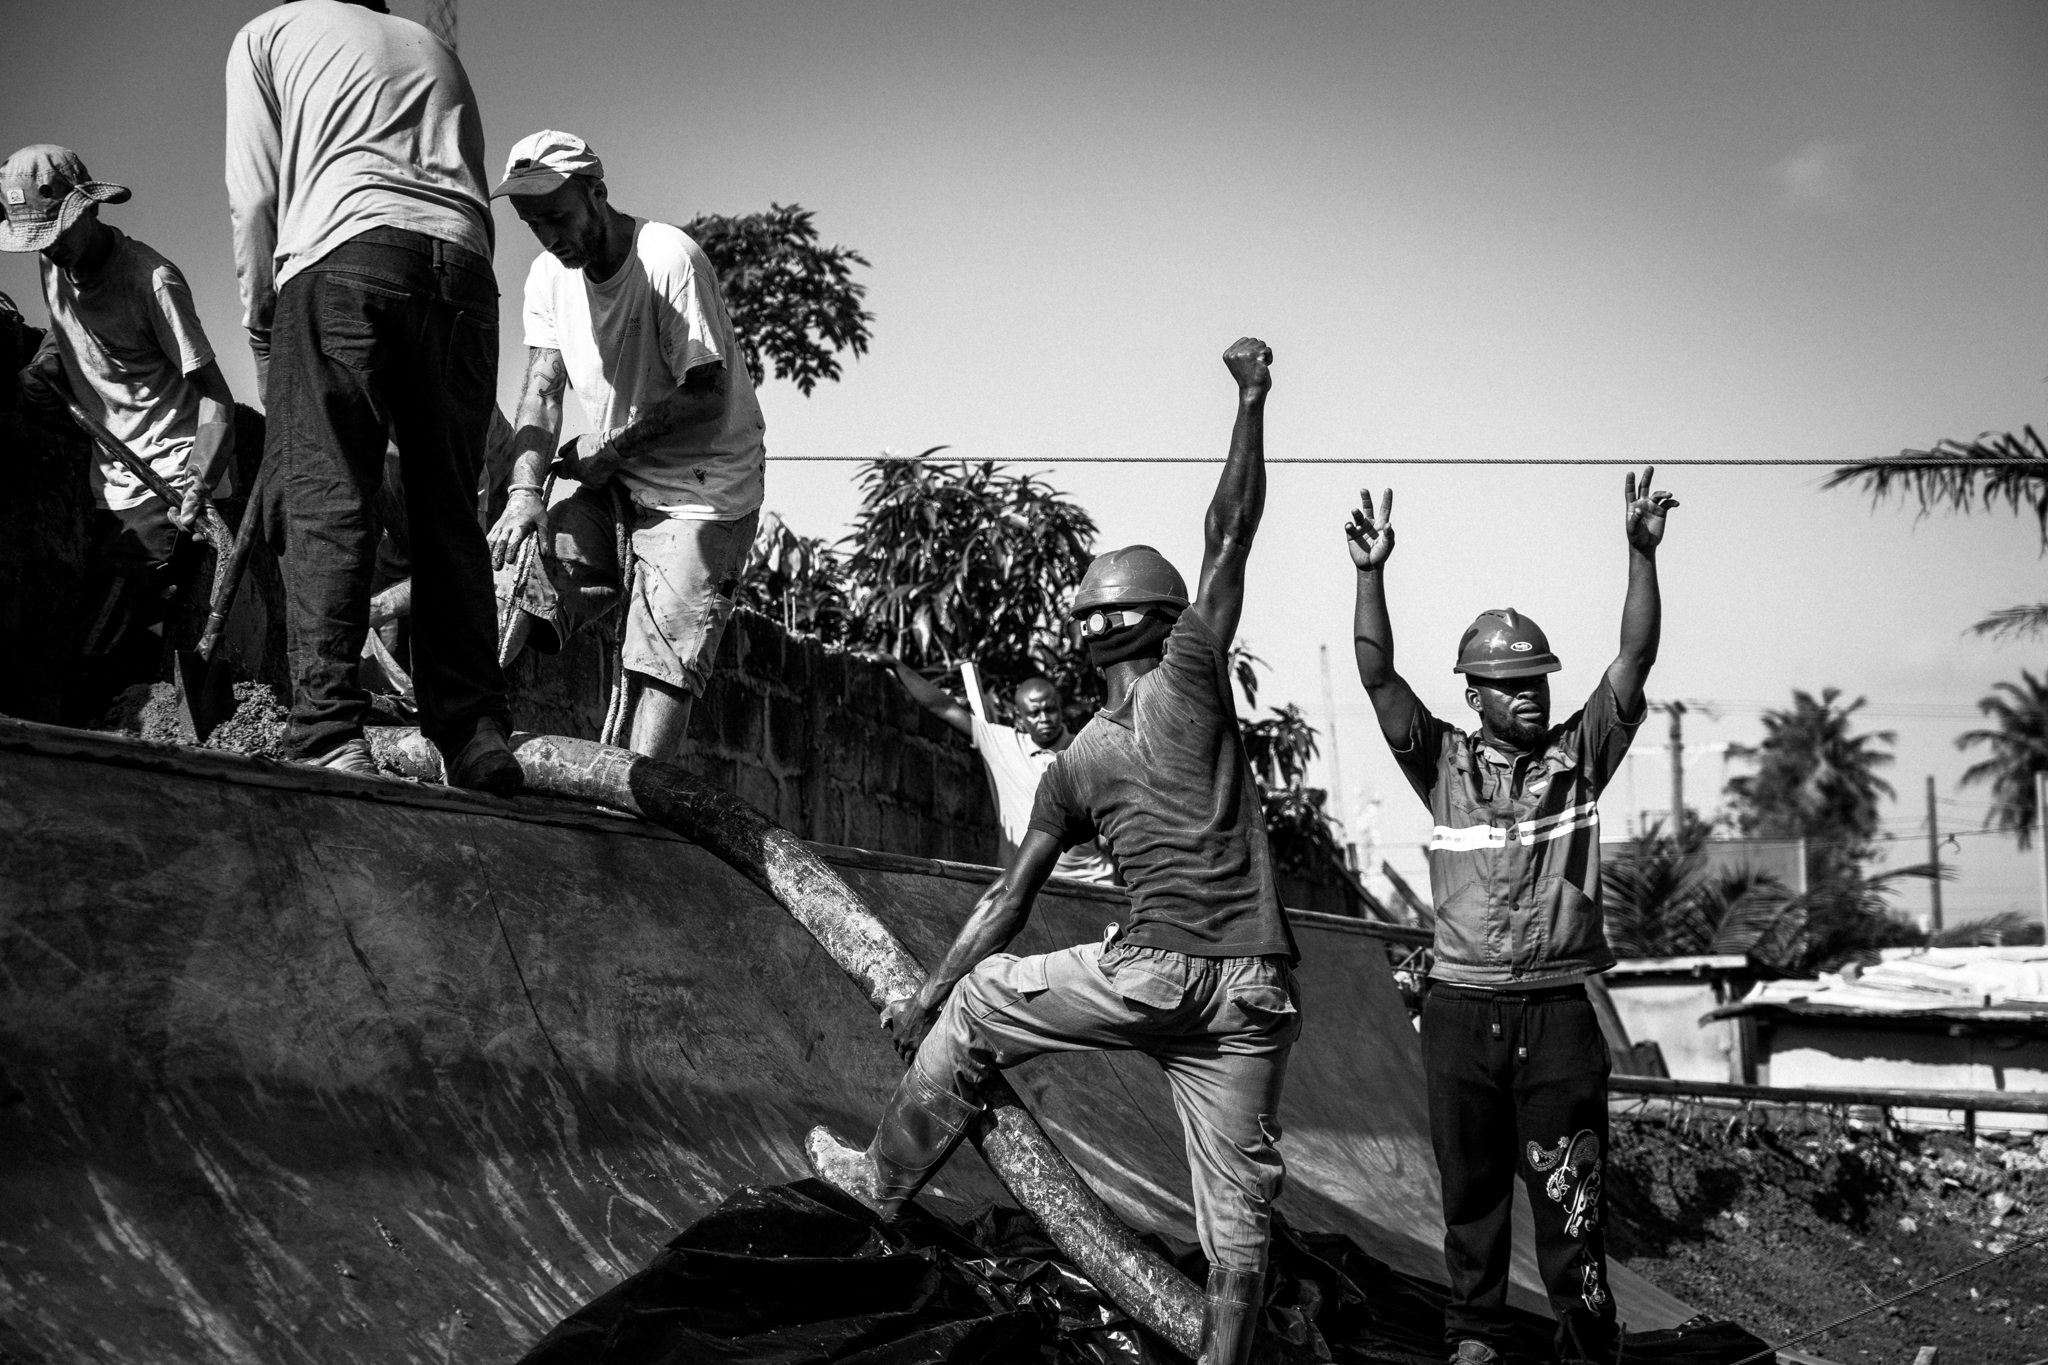 Ghana has just opened its first skatepark!